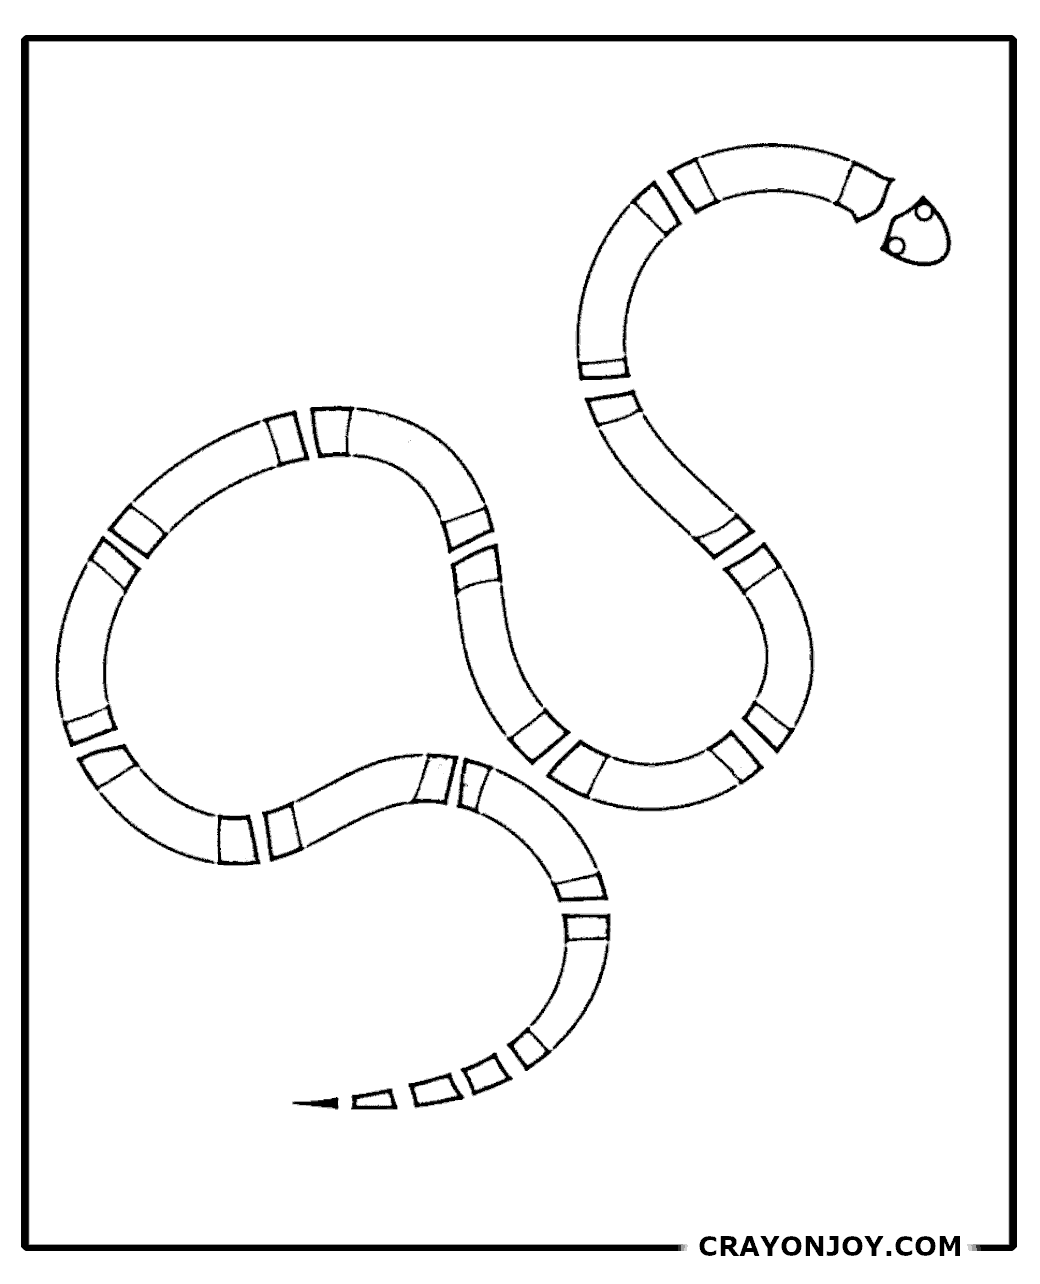 Kingsnake Coloring Pages: Free Printable Sheets for Kids and Adults